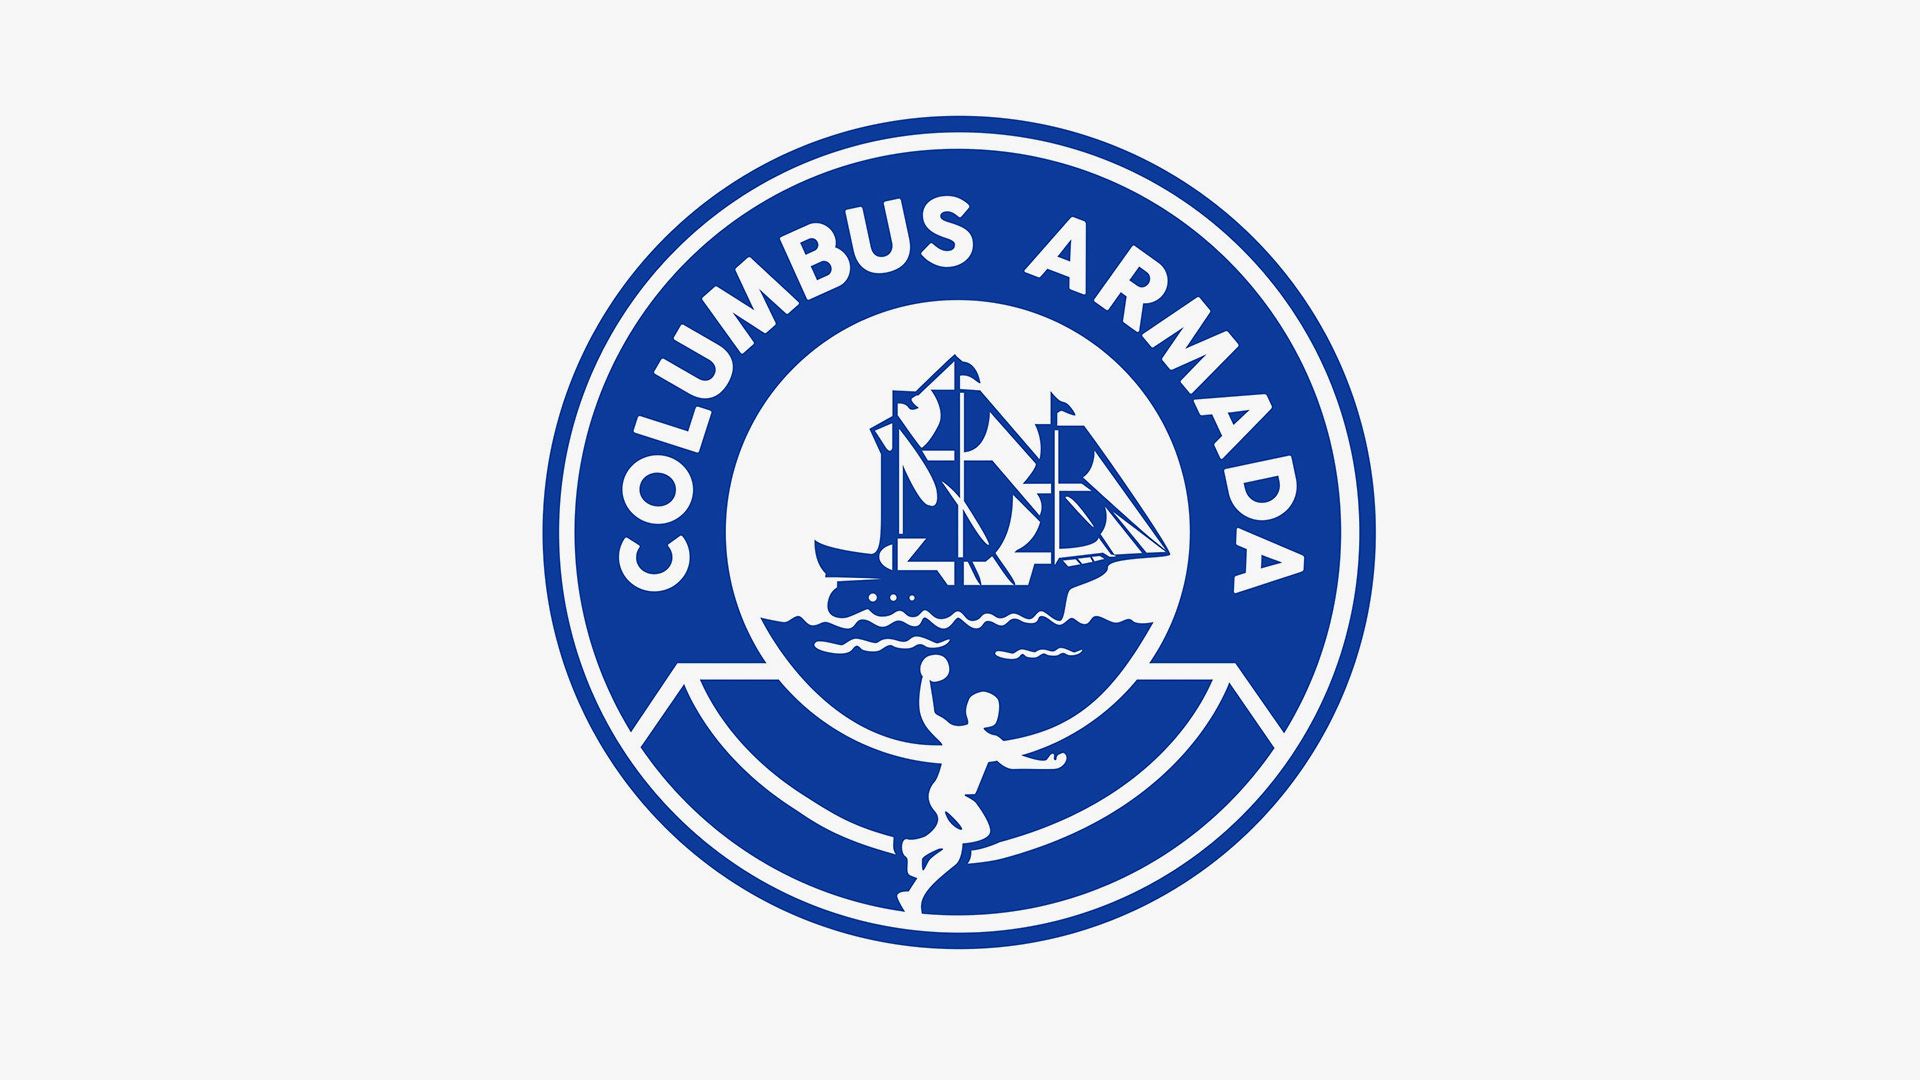 The Columbus Armada handball club logo, with a ship and an outline of a player throwing a ball.